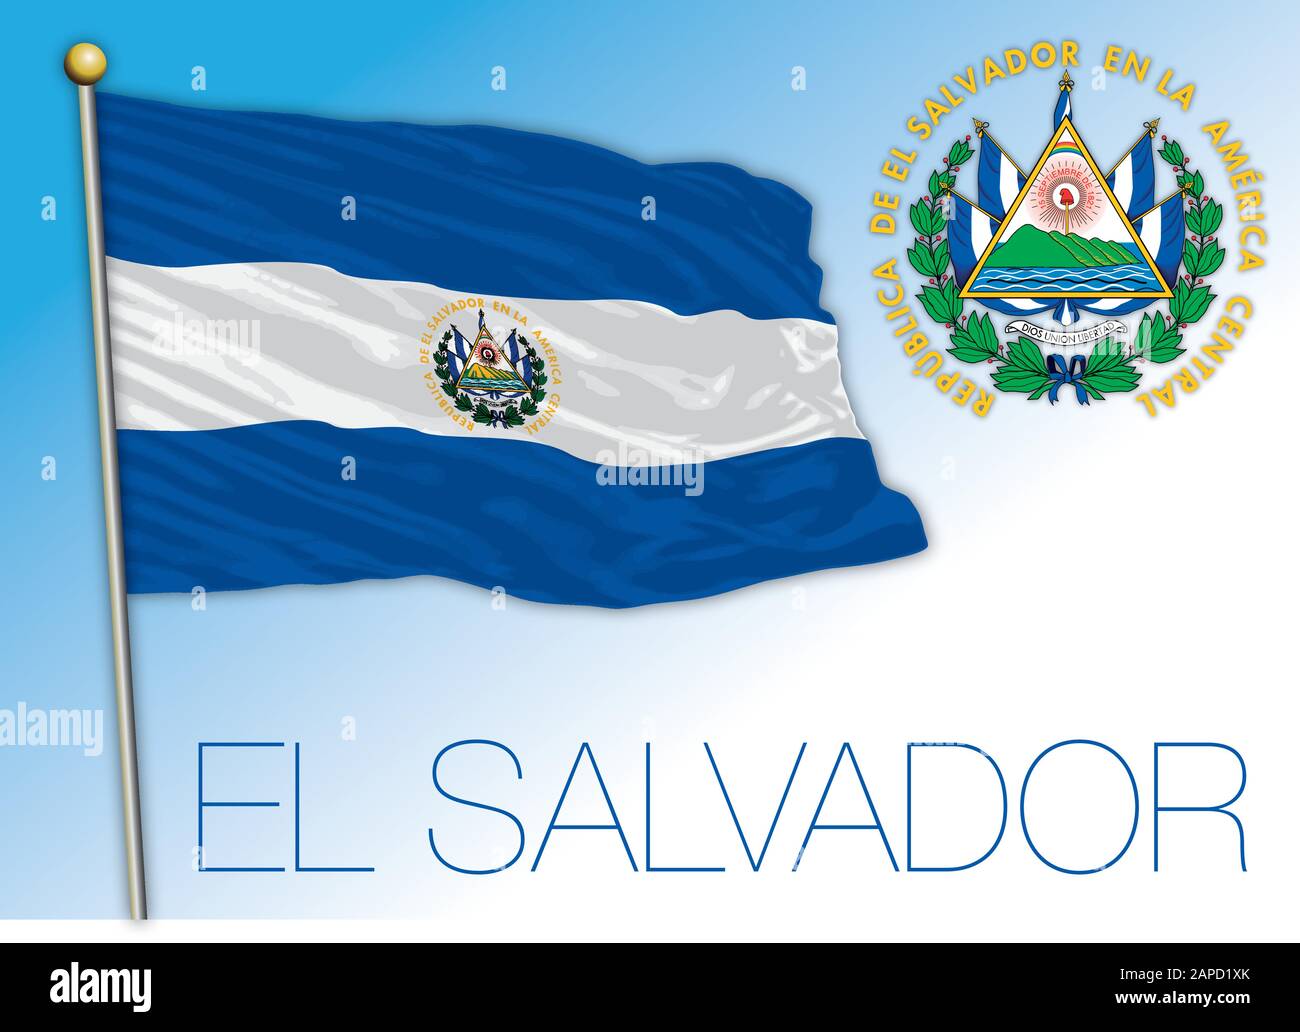 El Salvador official national flag and coat of arms, central american country, vector illiustration Stock Vector